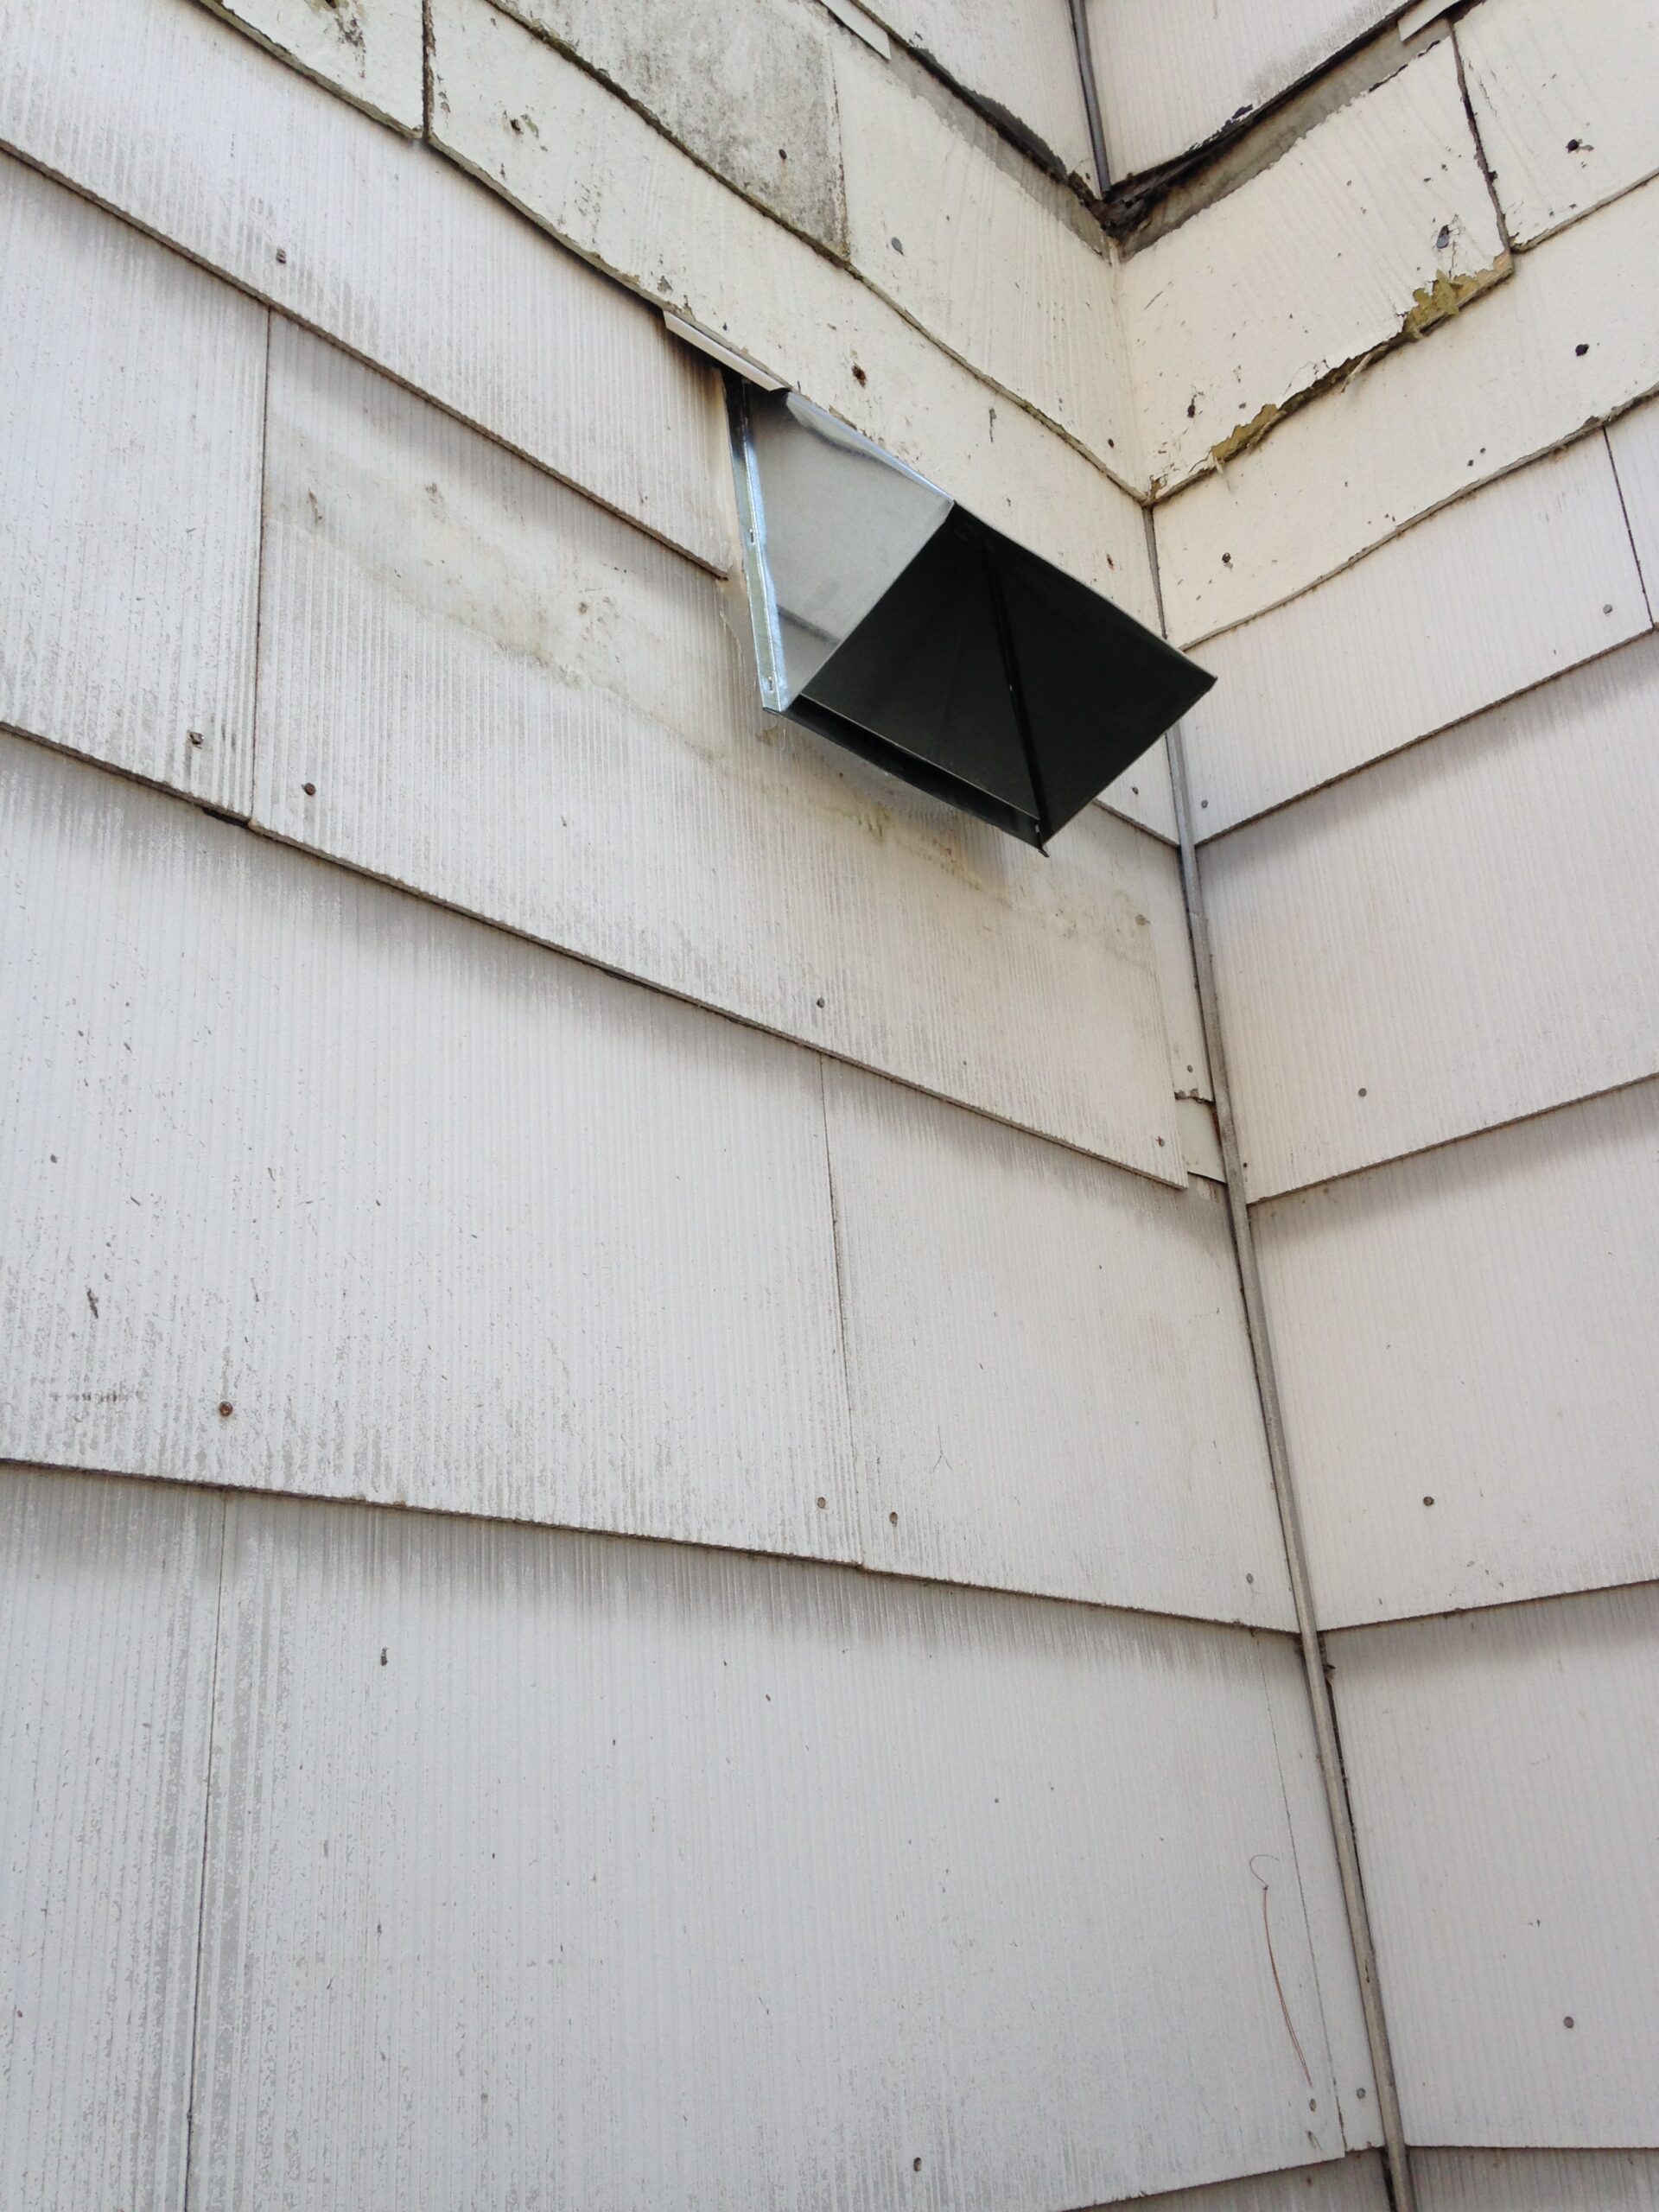 exterior of house with exhaust vent